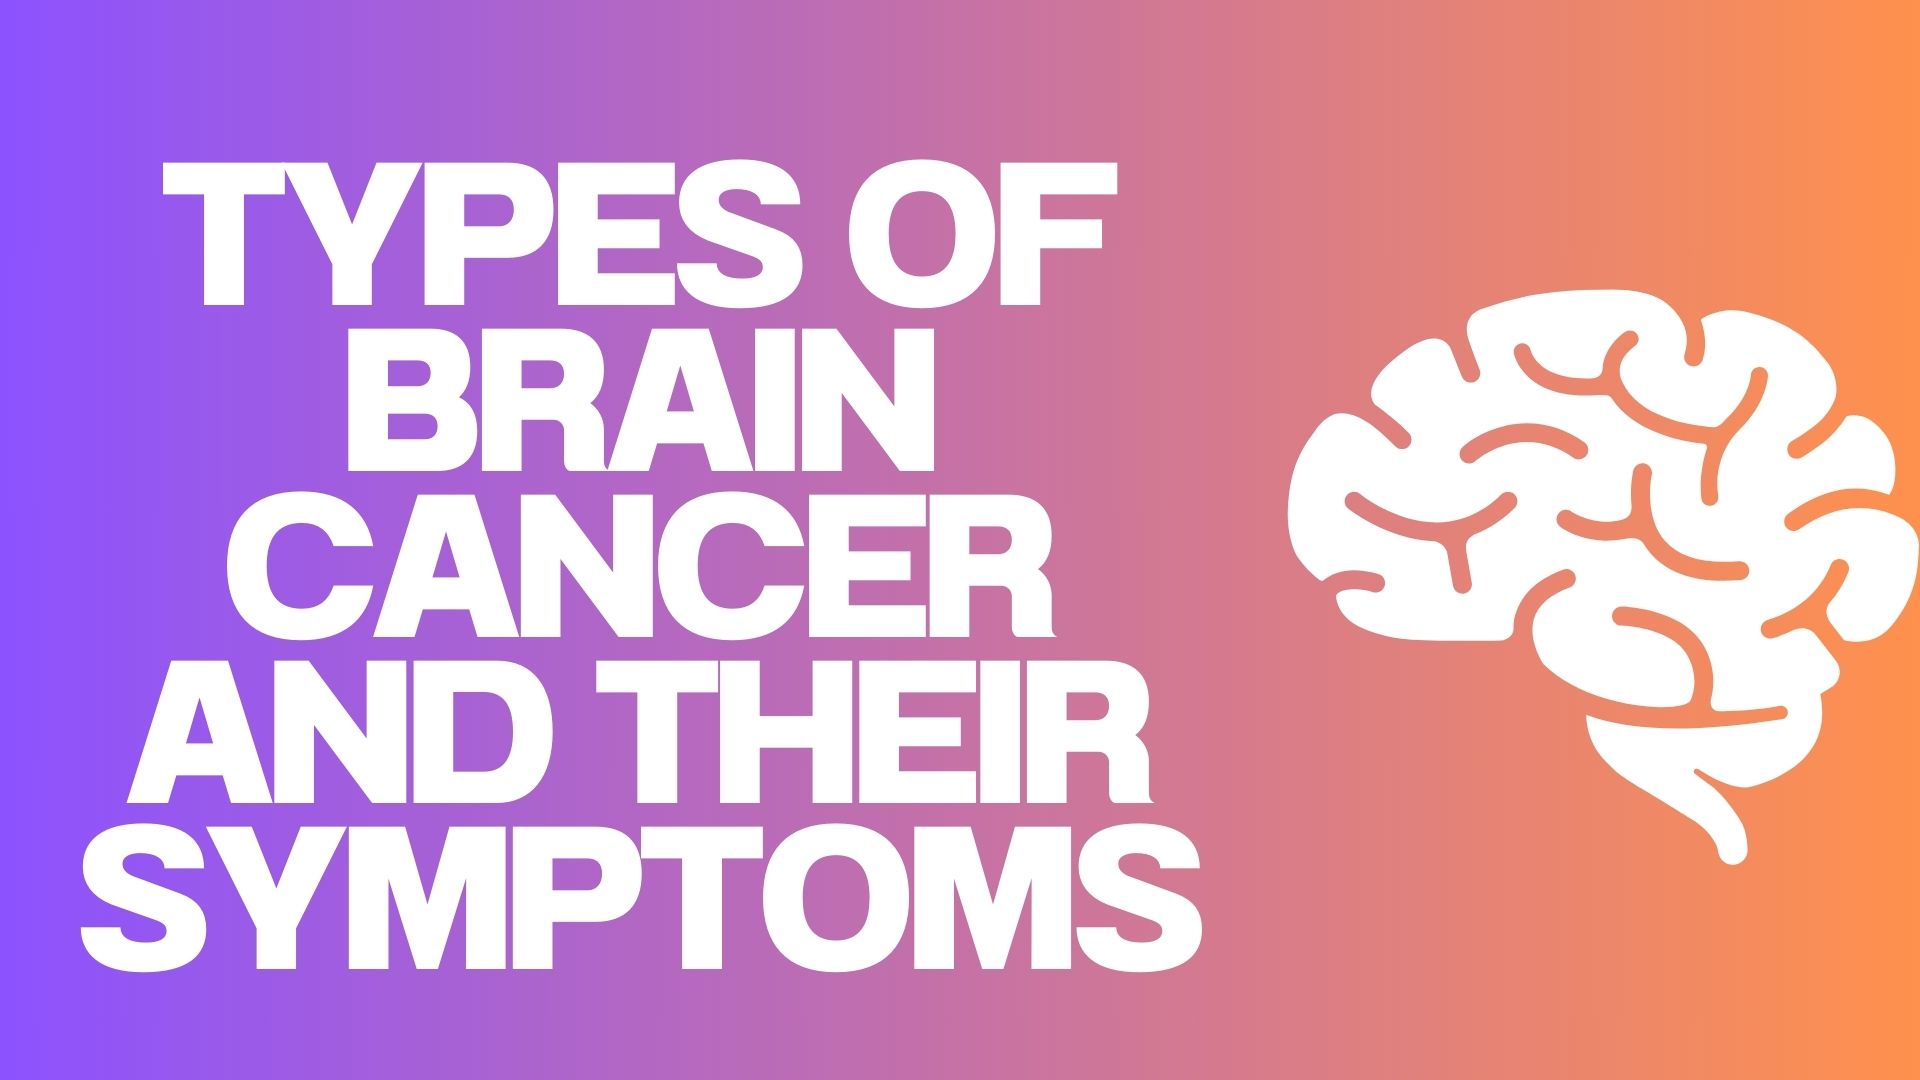 Types of Brain Cancer and Their Symptoms